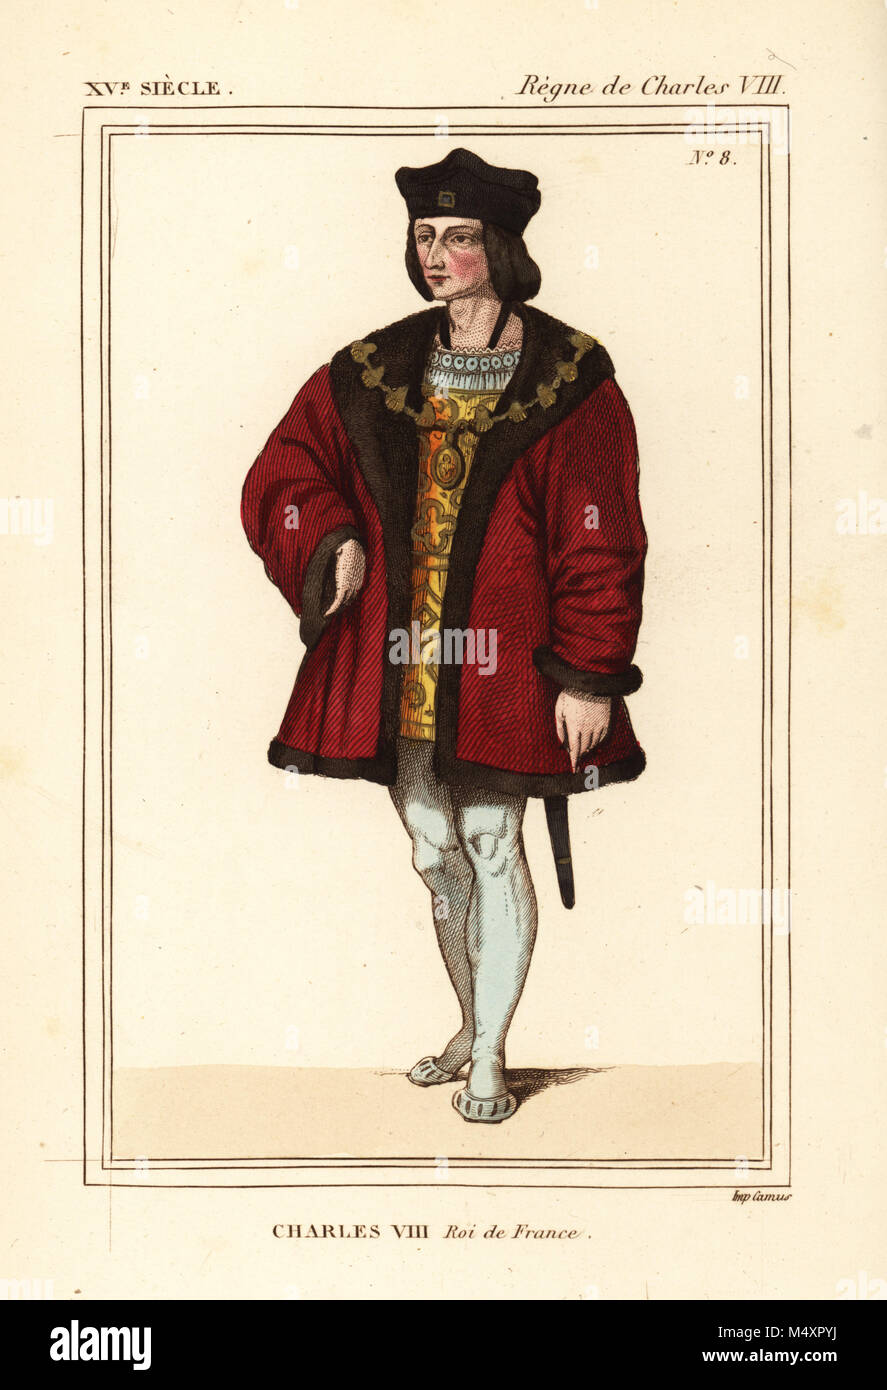 King Charles VIII of France, the Affable, 1470-1498. He wears a